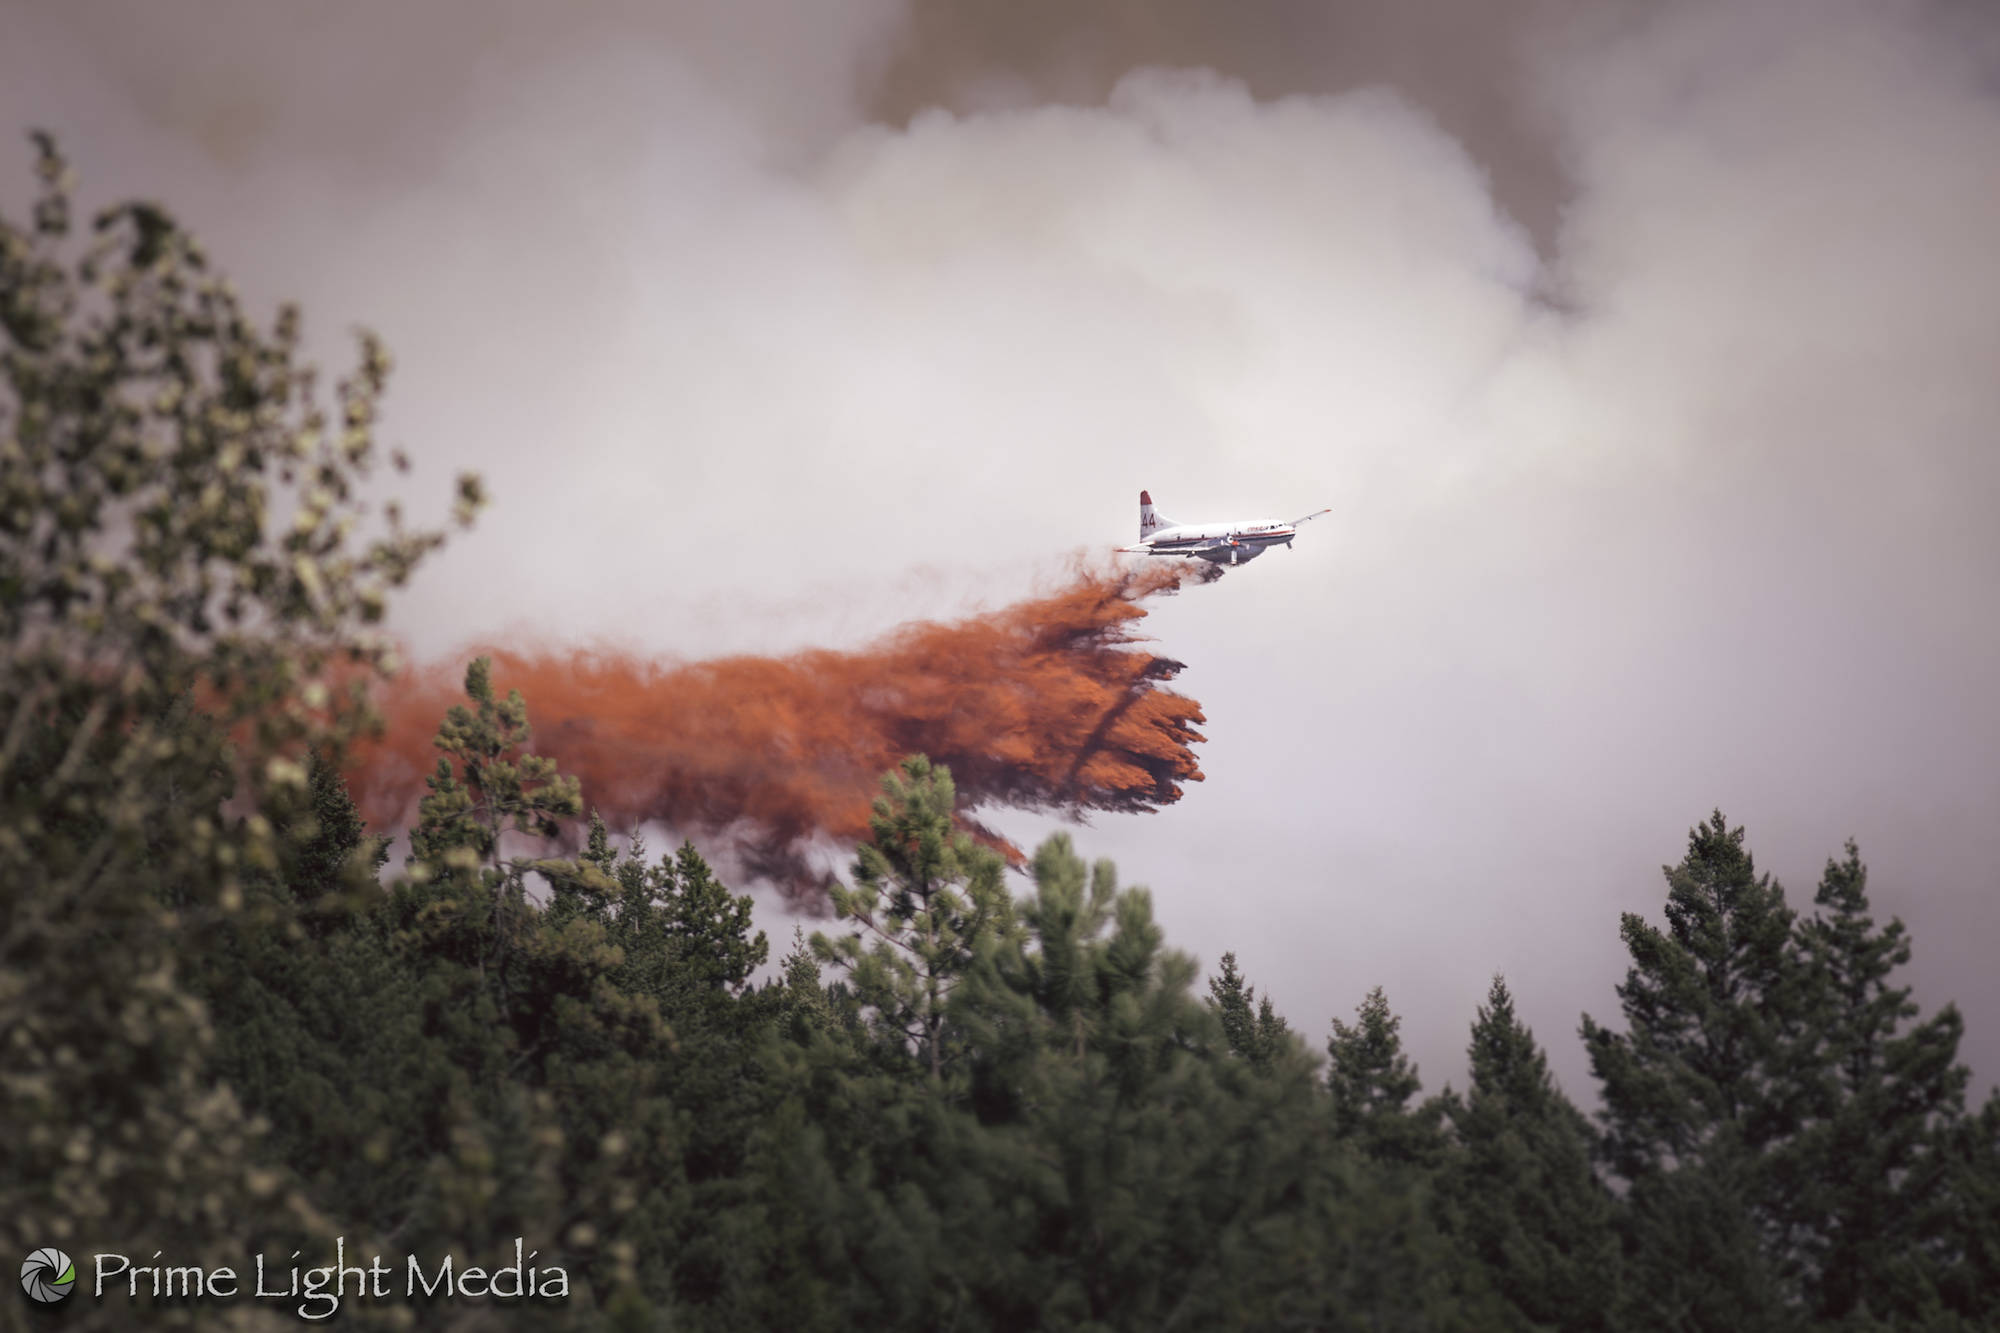 Photos of aircraft fighting the Joe Rich fire on Aug. 25, 2017. Image credit: Ethan Delichte from Prime Light Media